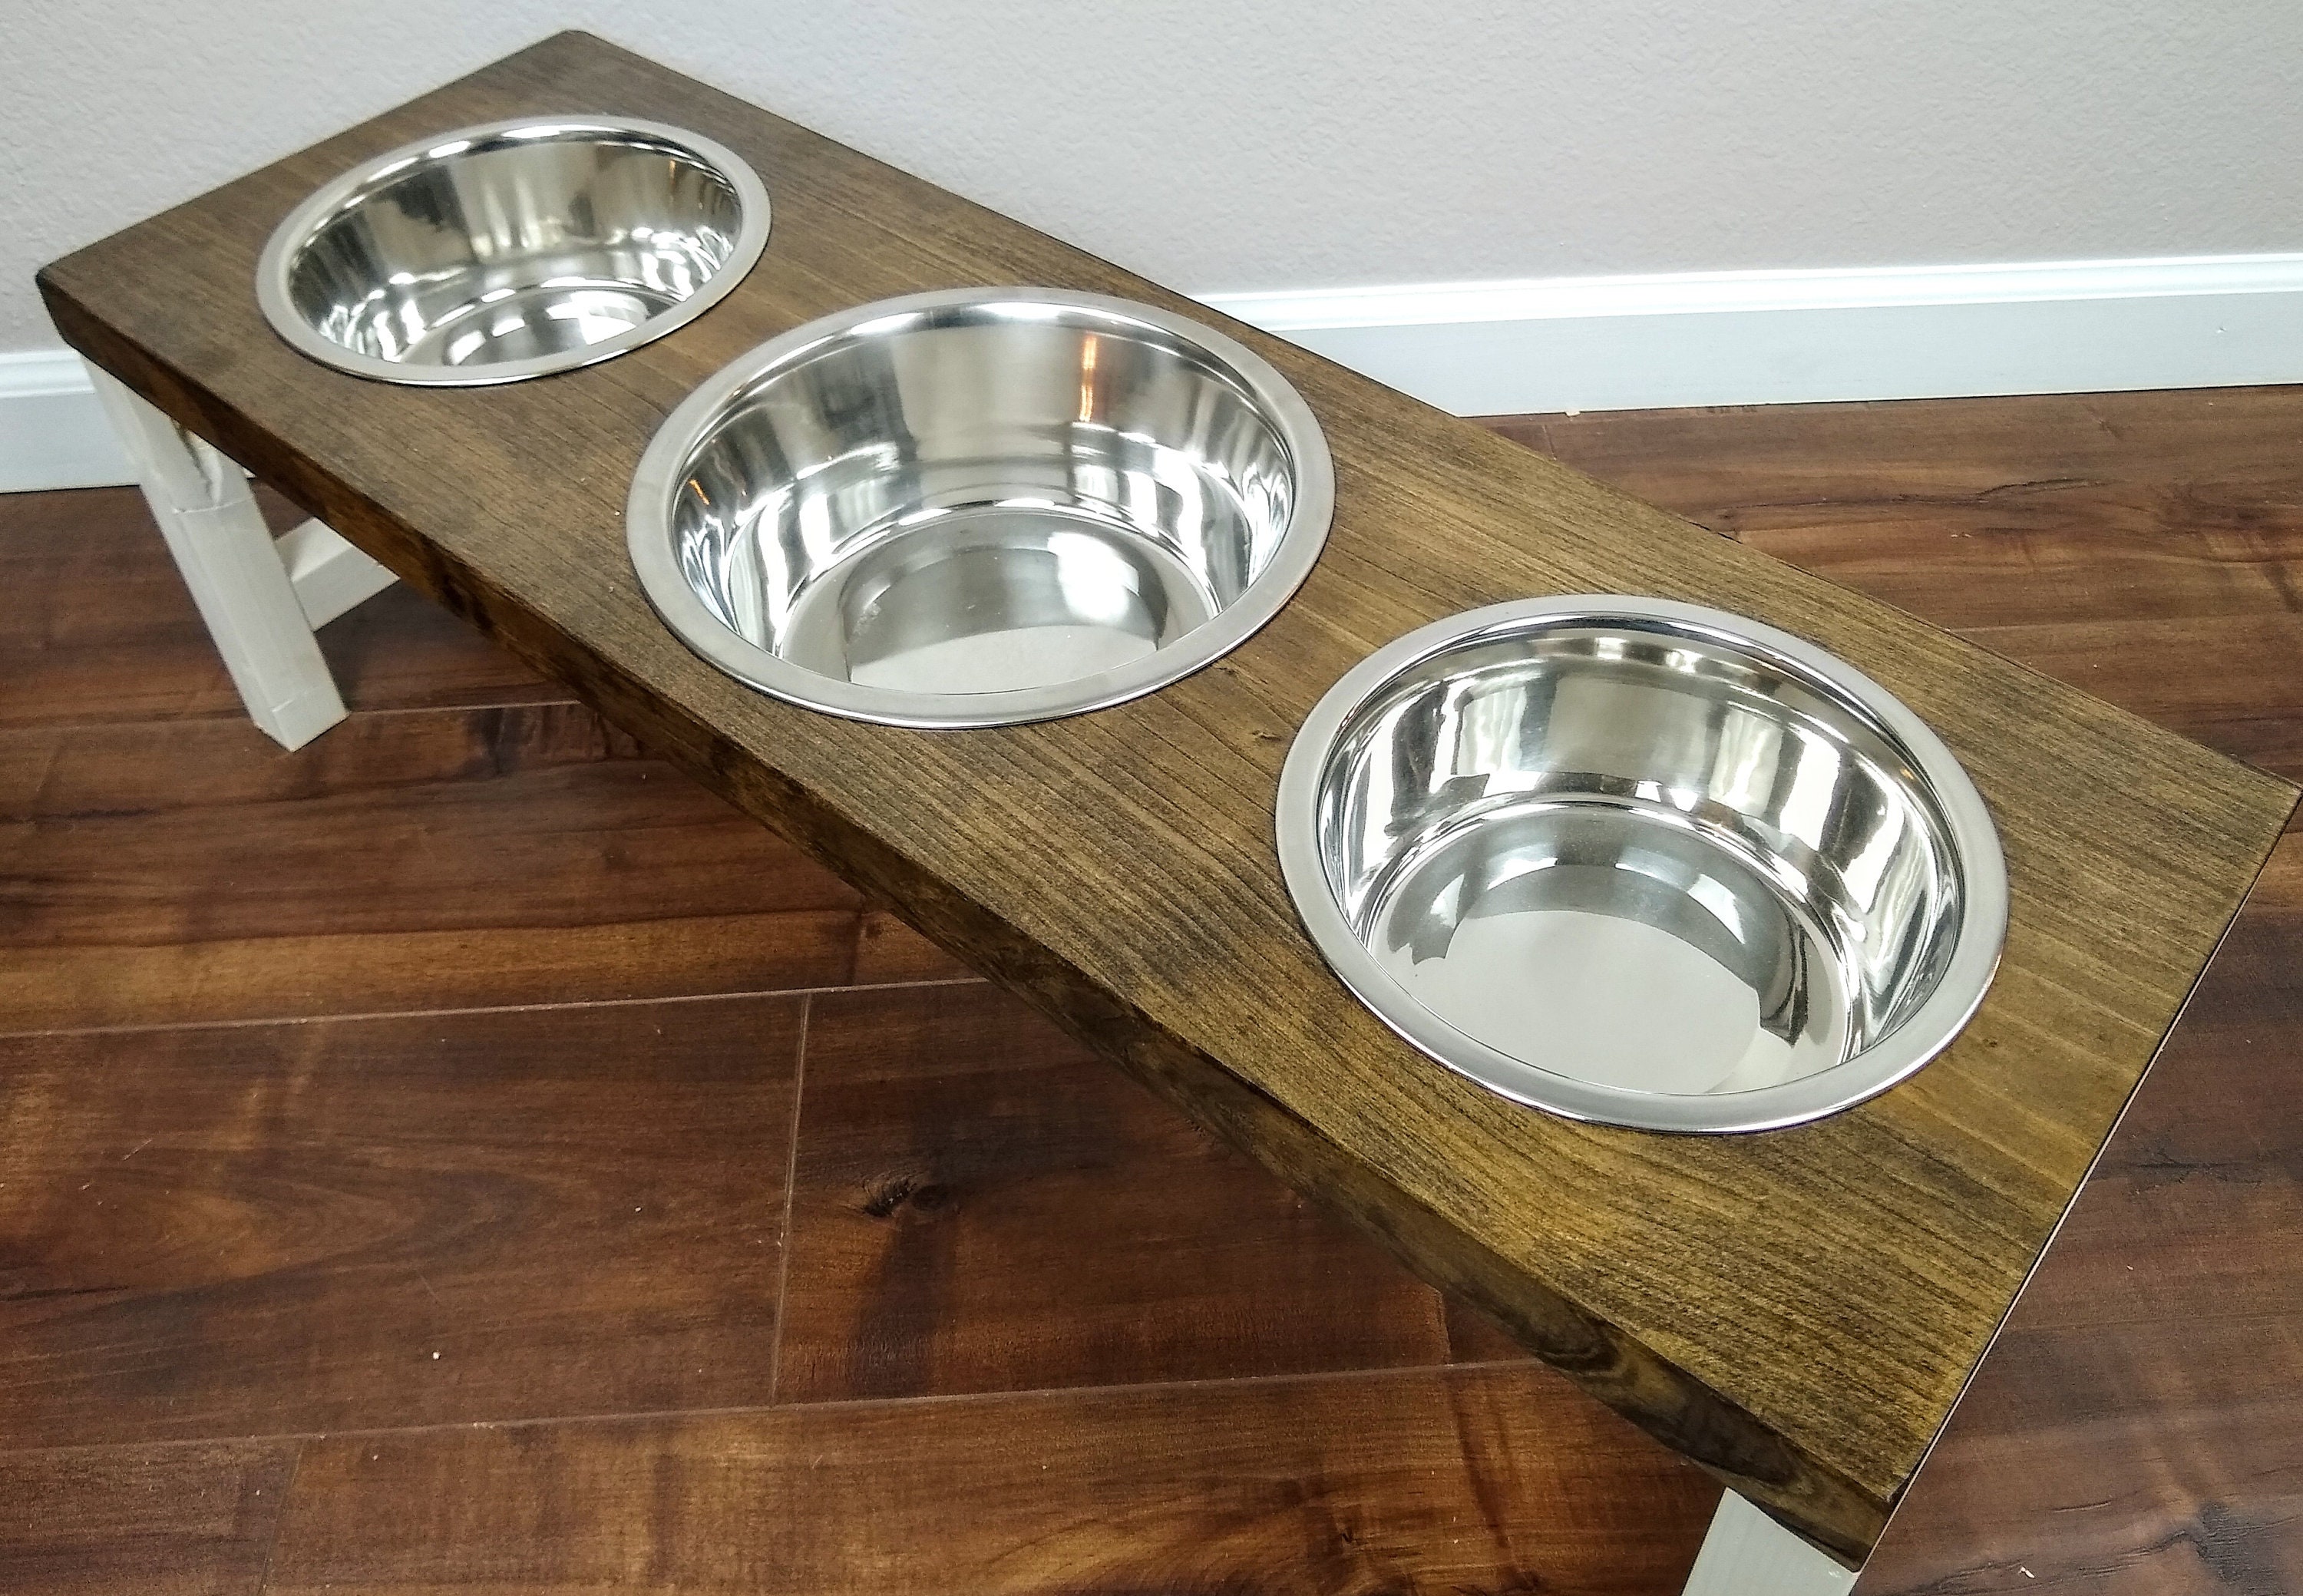 DOG FEEDING STATION- such a - Kitchen Fun With My 3 Sons